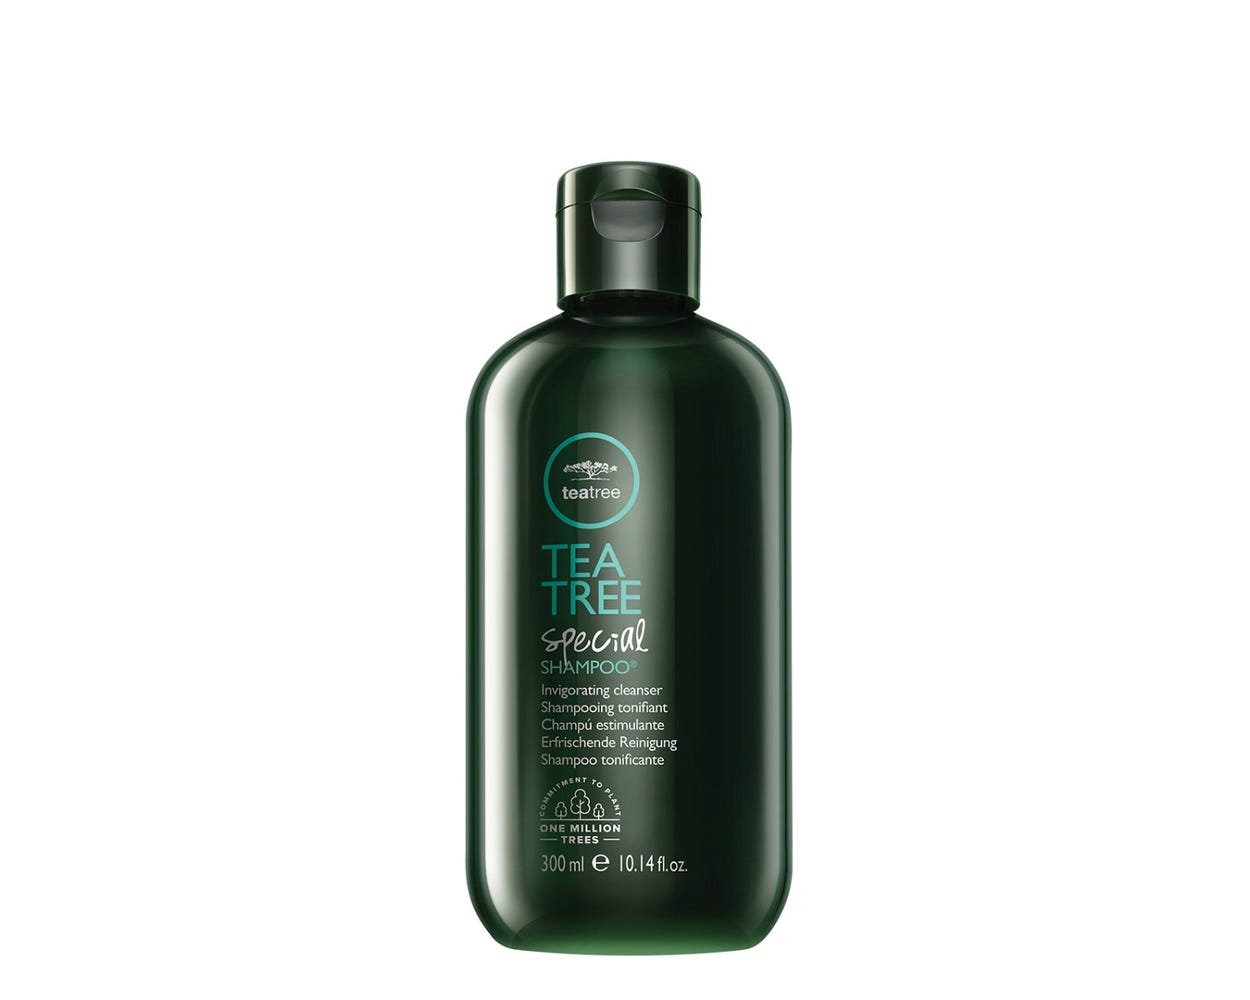 Tea Tree Special Shampoo, Deep Cleans, Refreshes Scalp, For All Hair Types, Especially Oily Hair 16.9 Fl Oz